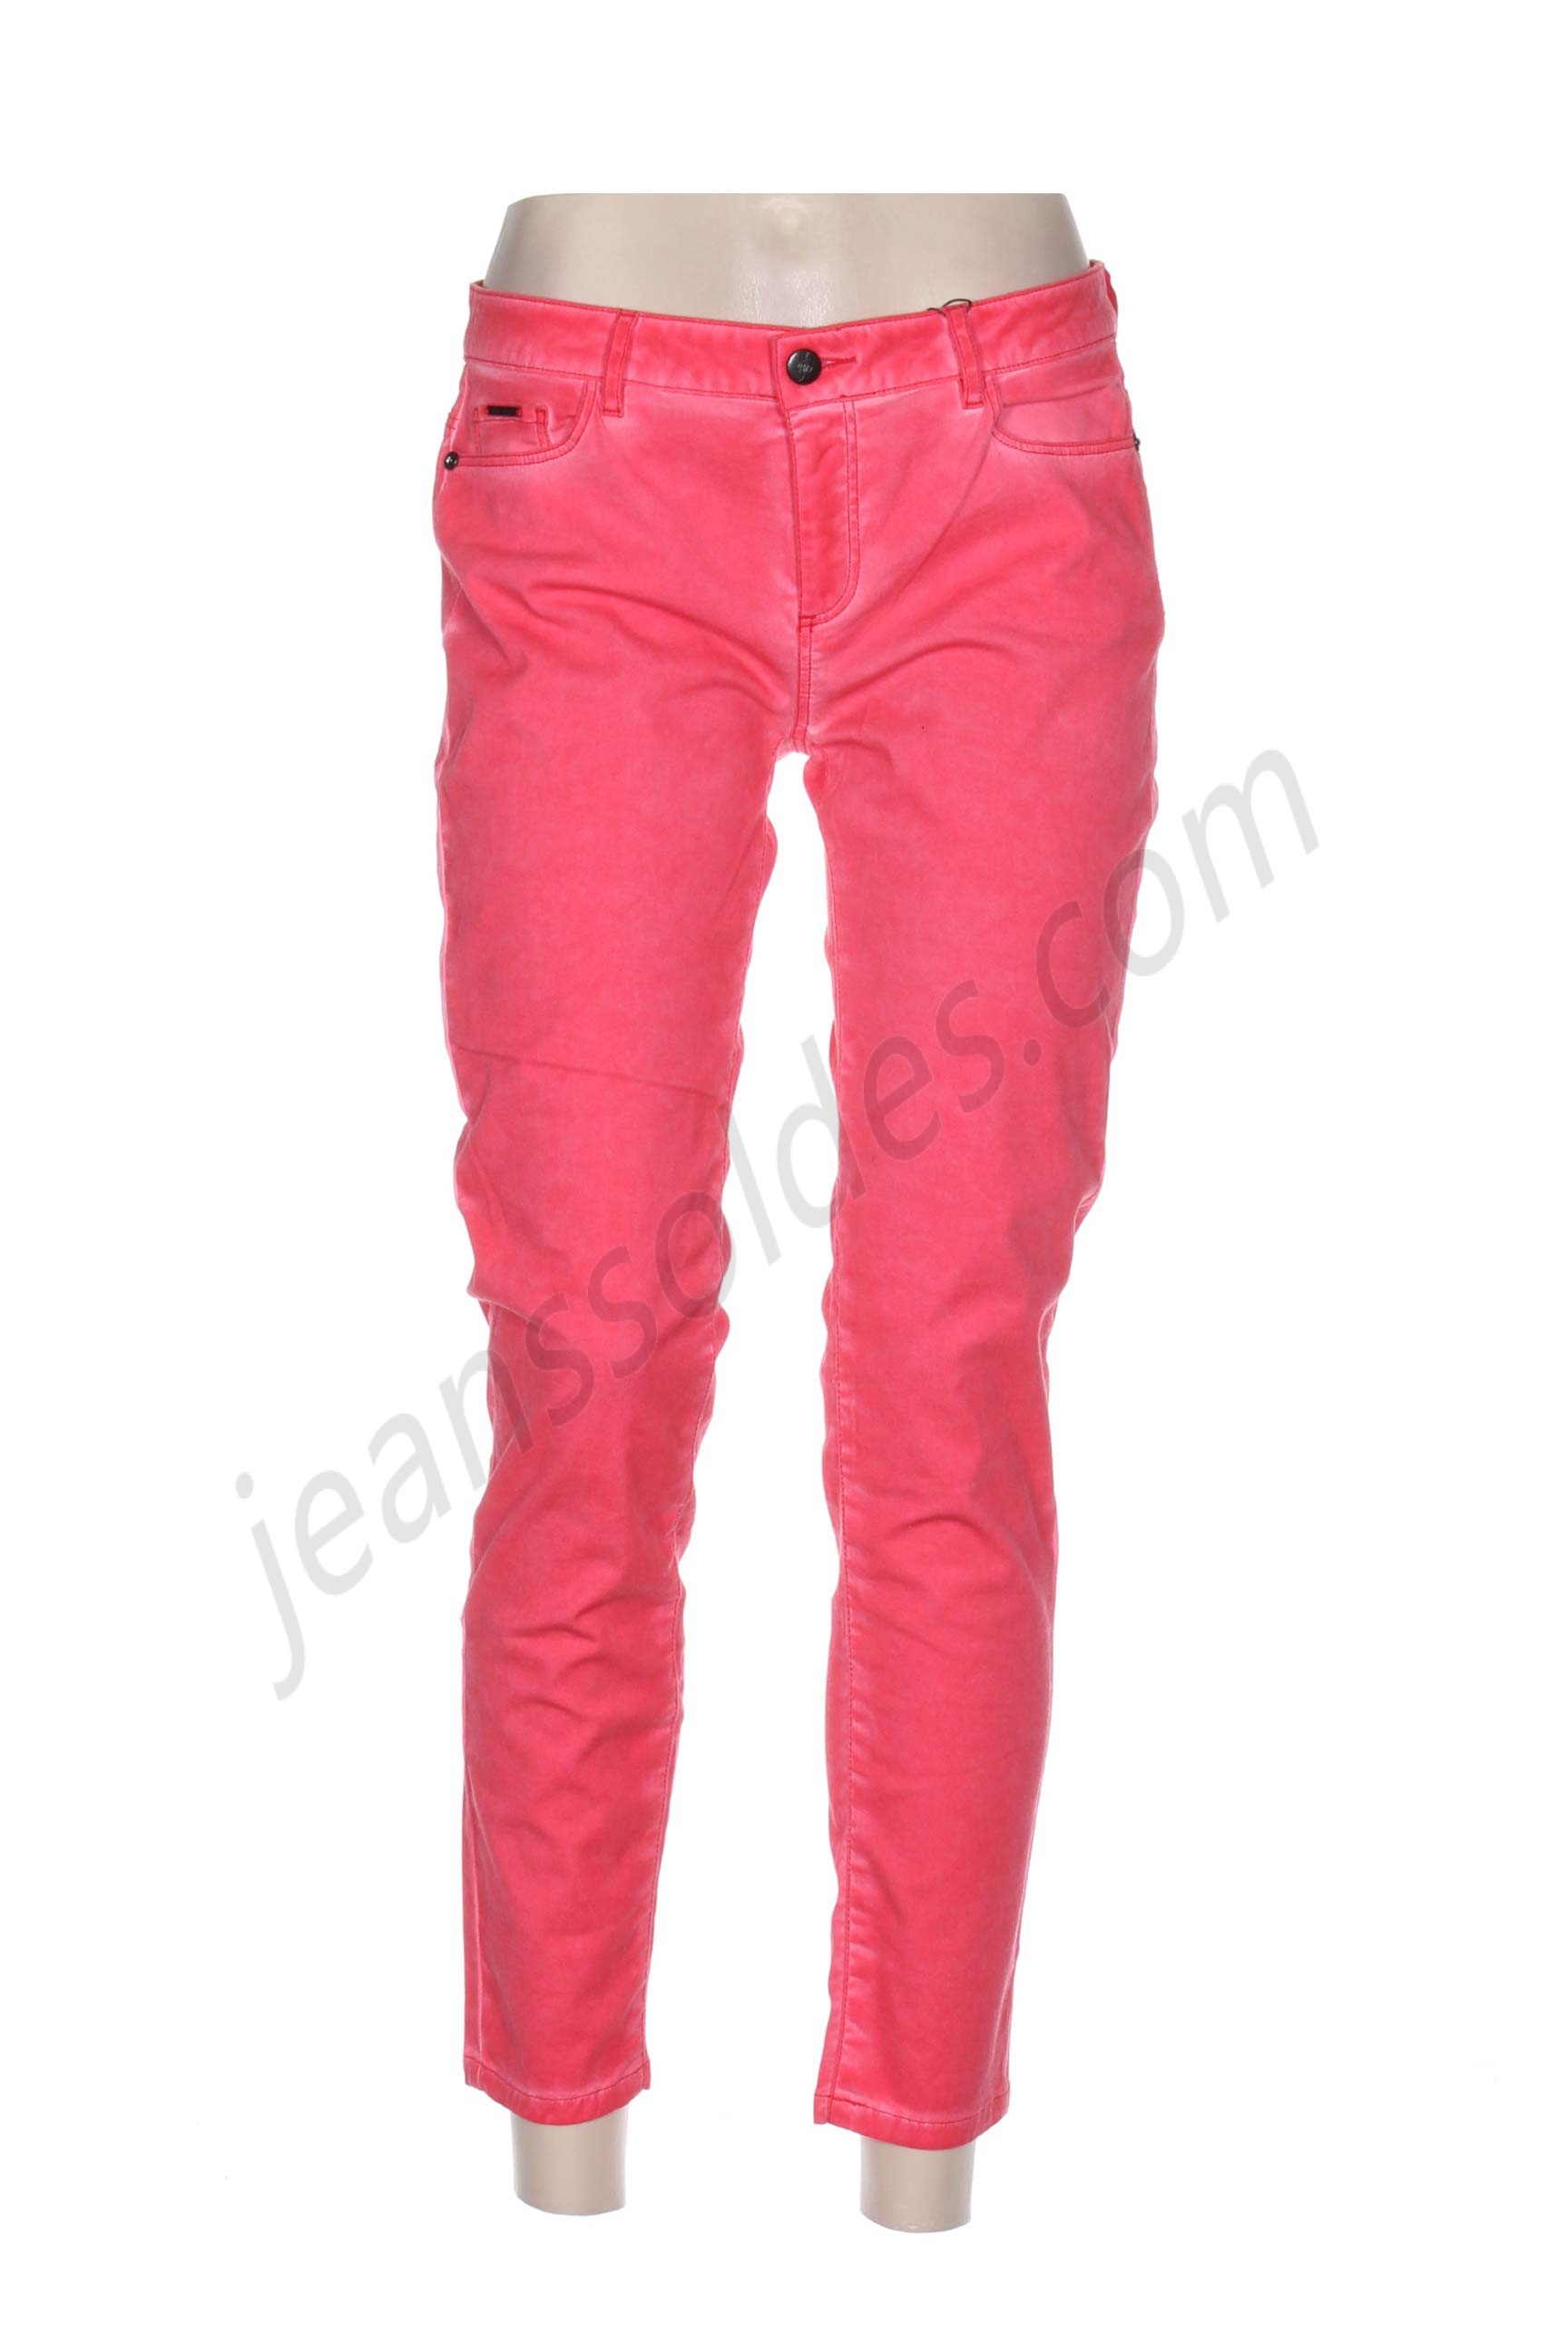 one step-Jeans coupe slim prix d’amis - one step-Jeans coupe slim prix d’amis